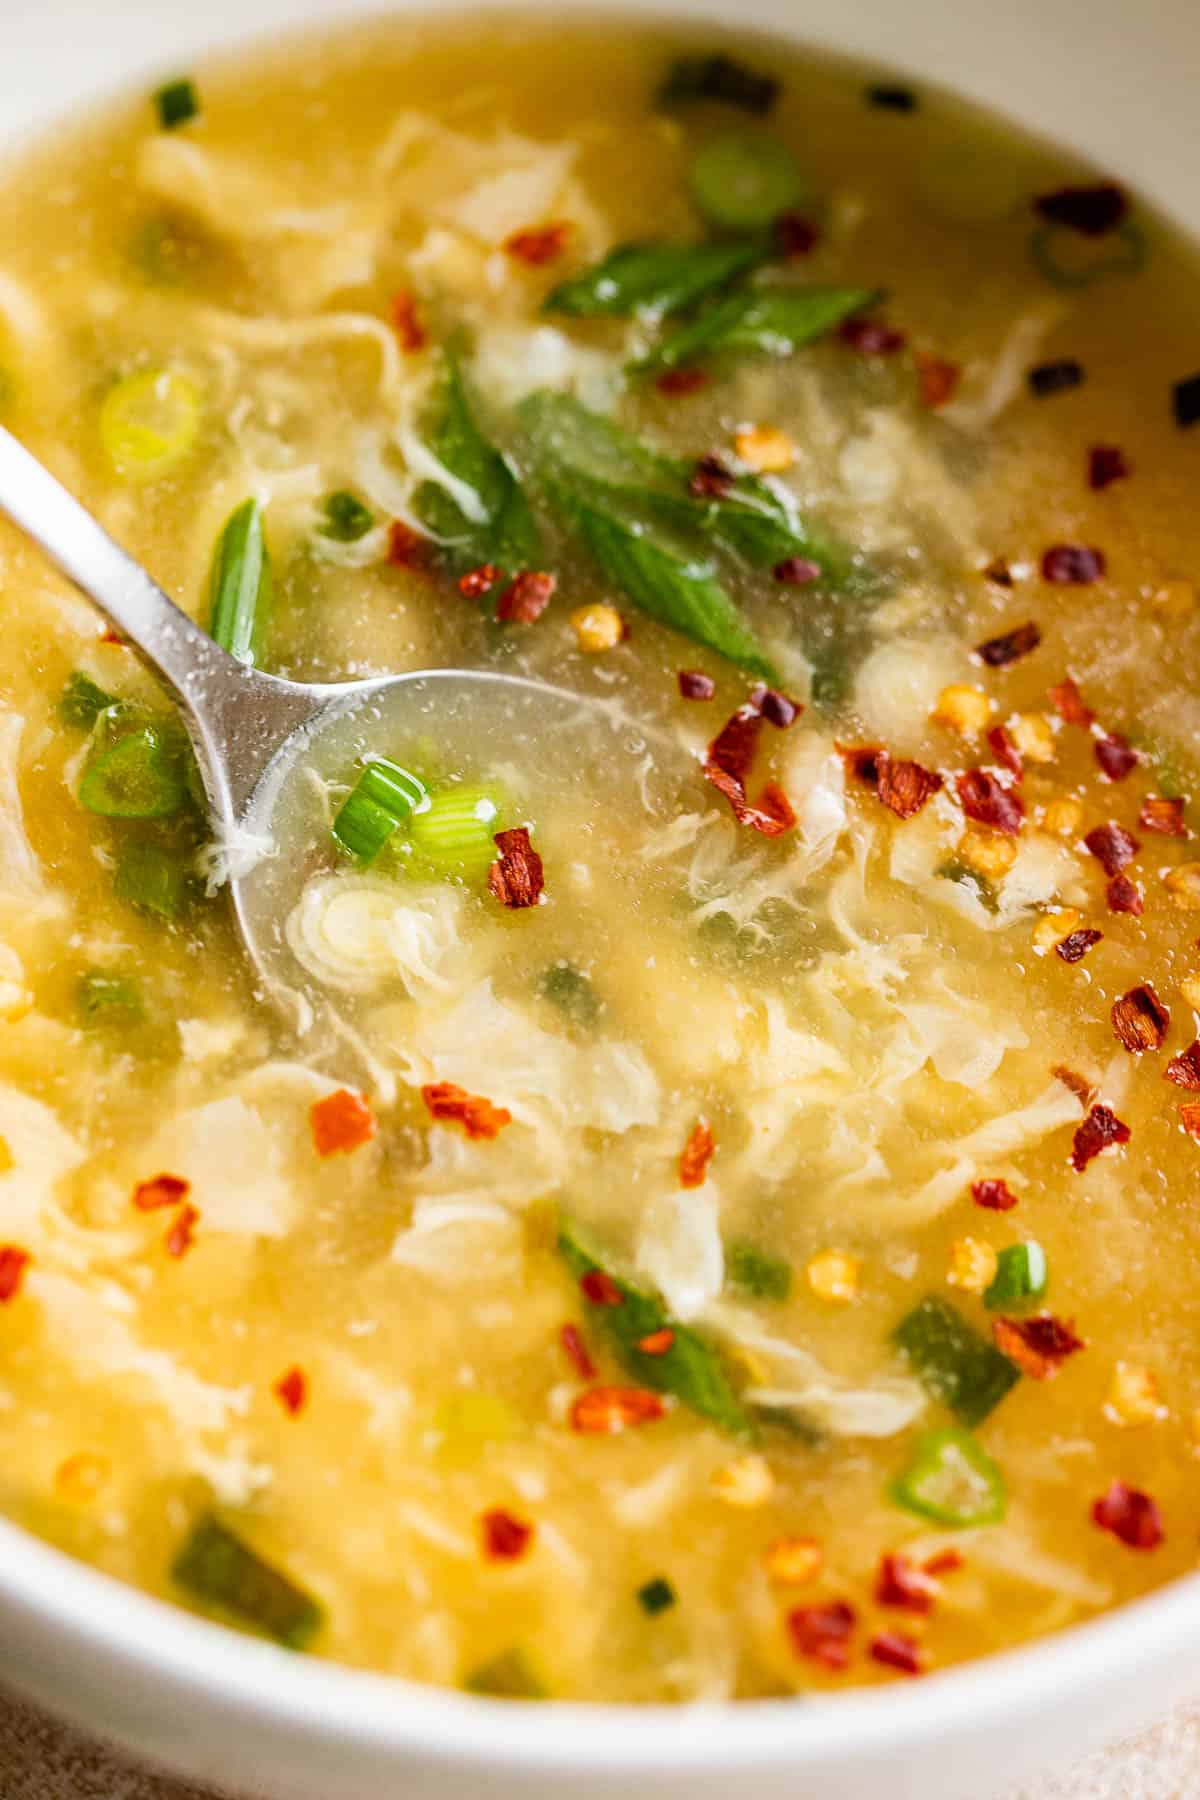 close up side shot of a bowl with egg drop soup garnished with green onions and red pepper flakes